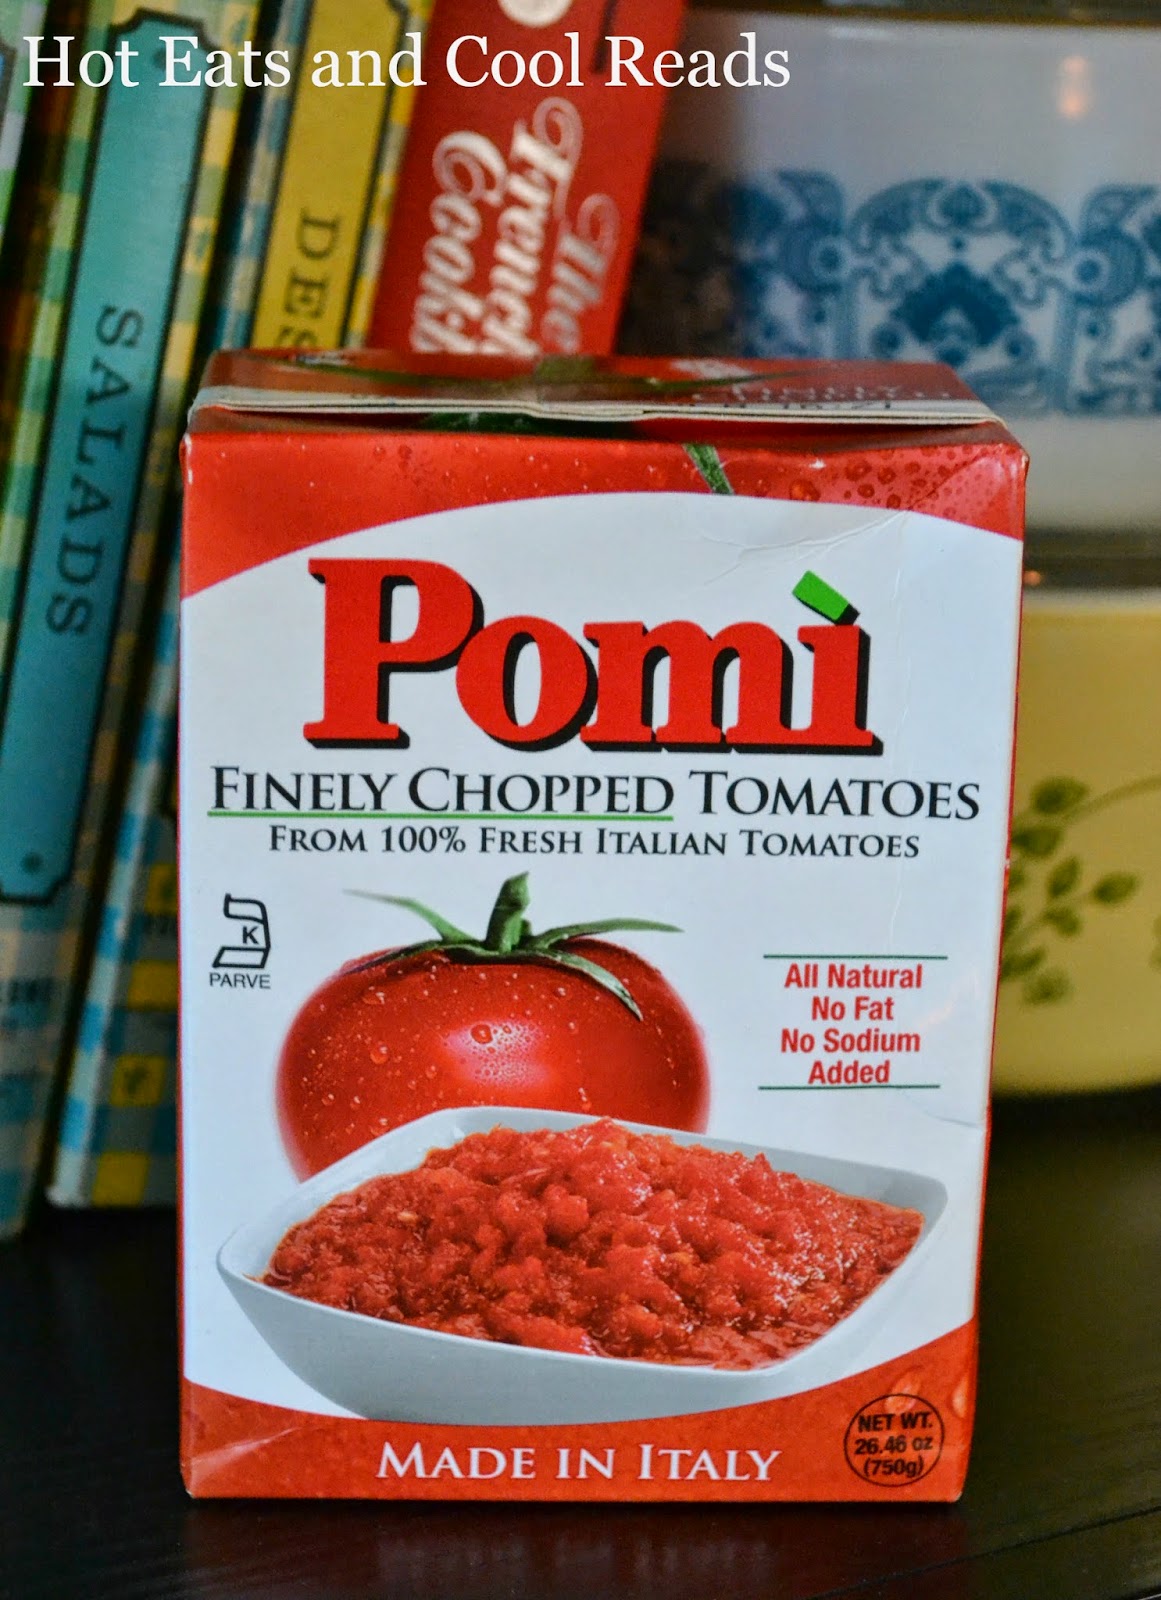 The reason why I love Pomi Tomatoes so much, they are made in Italy, 100% natural, and packaged in BPA free, stay fresh containers!